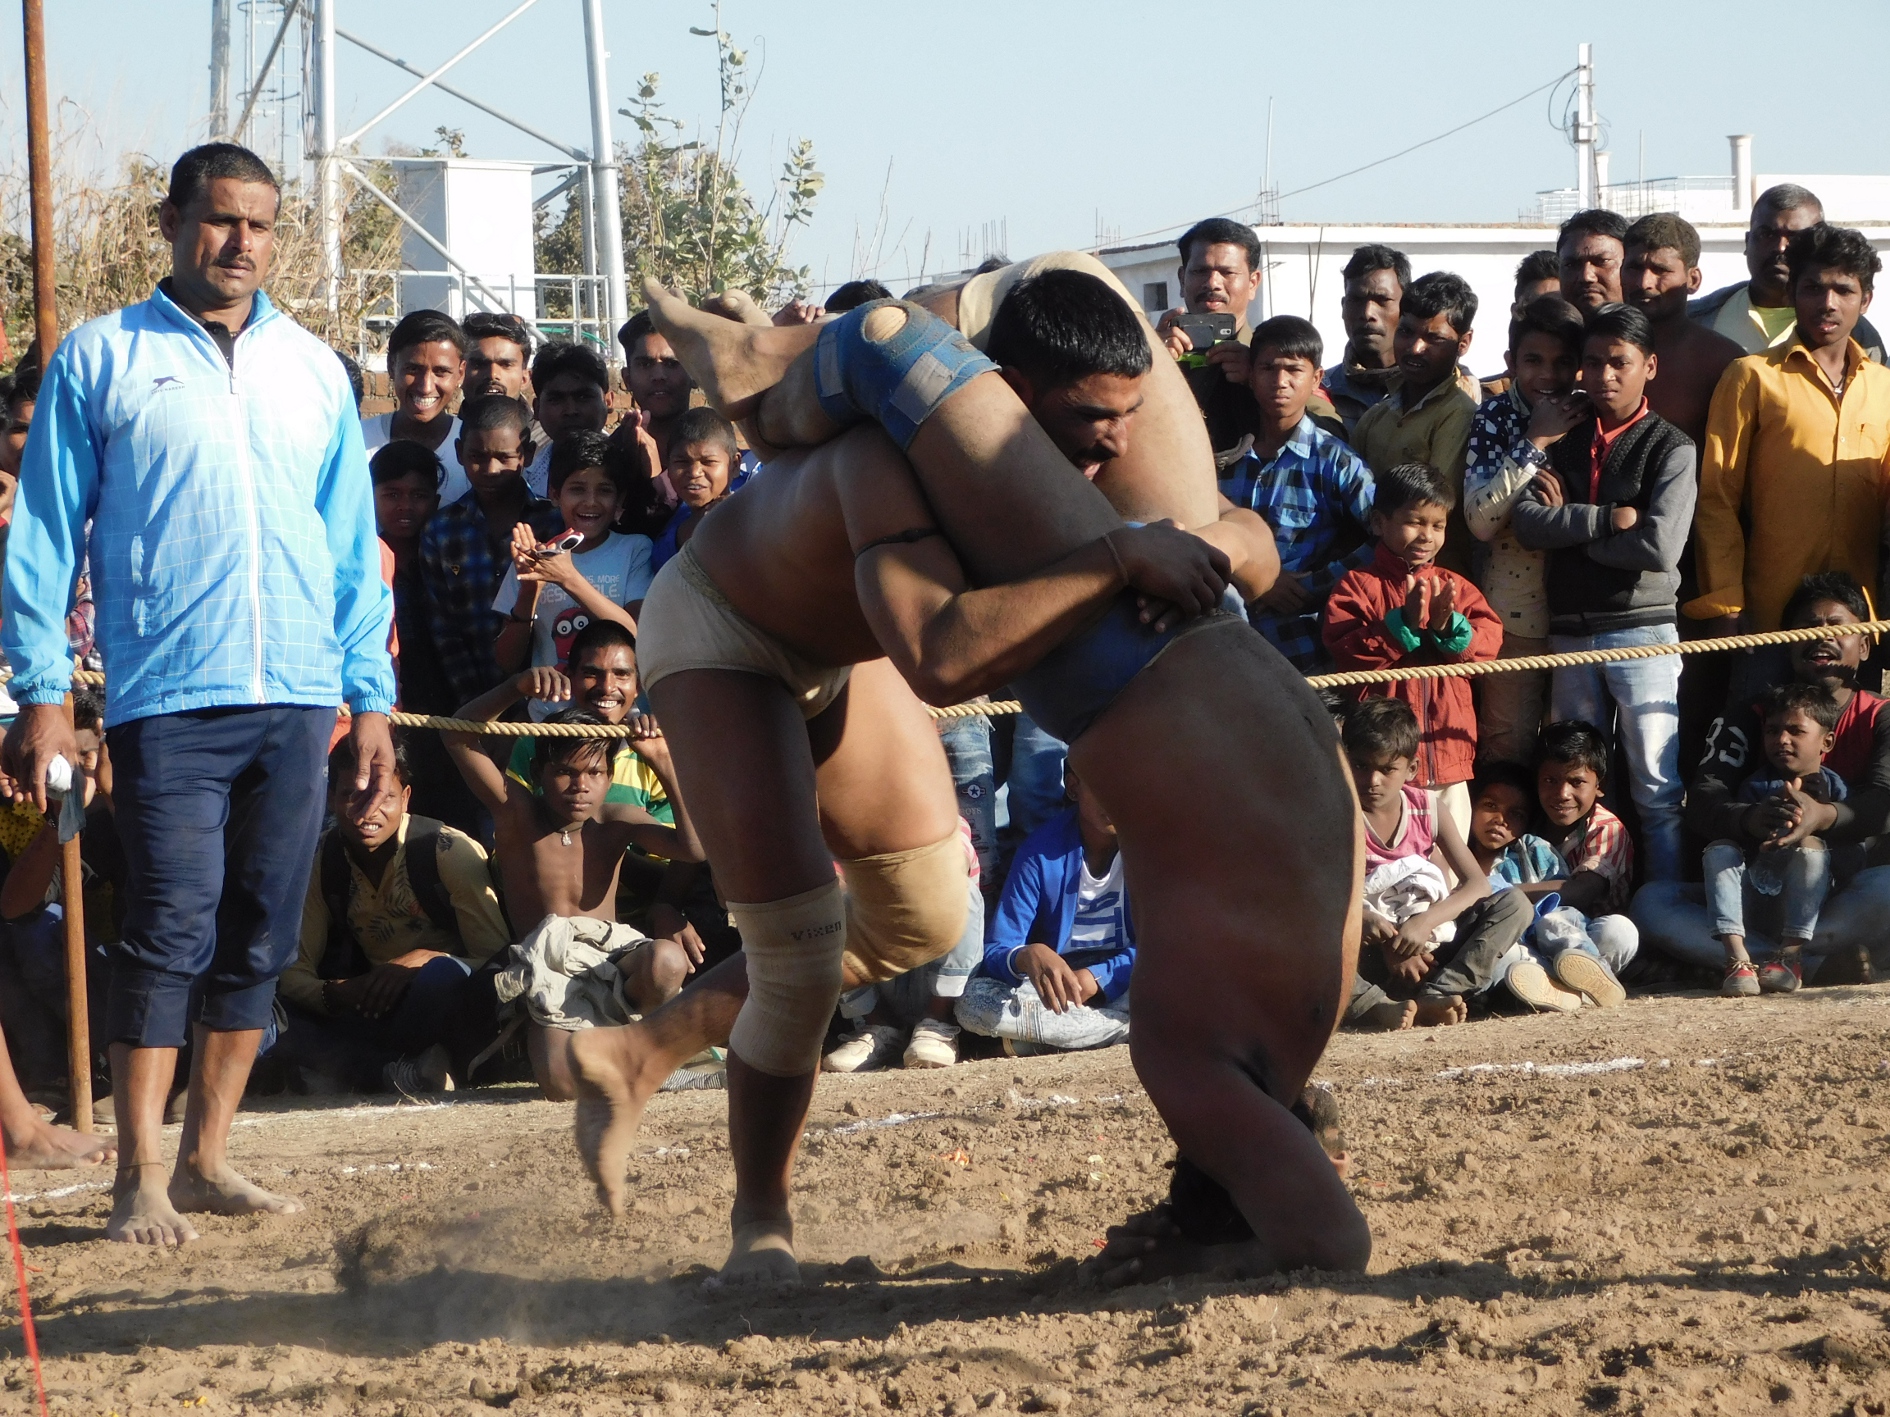 This Umaria wrestler has made everyone in the arena